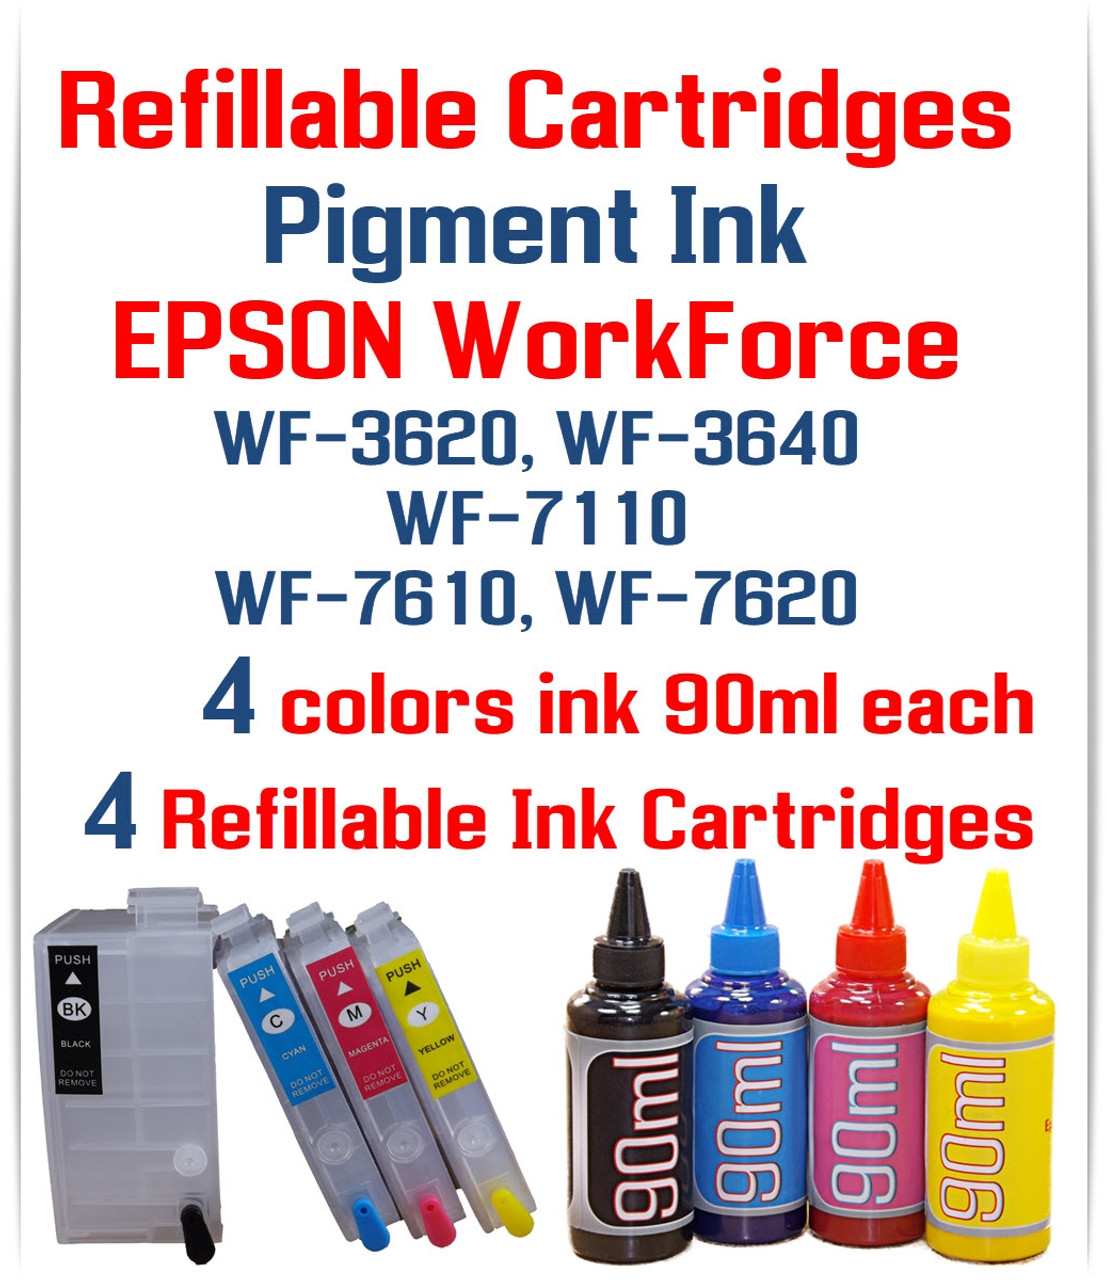 Pigment ink 90ml bottles and Refillable ink cartridges Epson WF-7110 WF-7610 WF-7620 printers